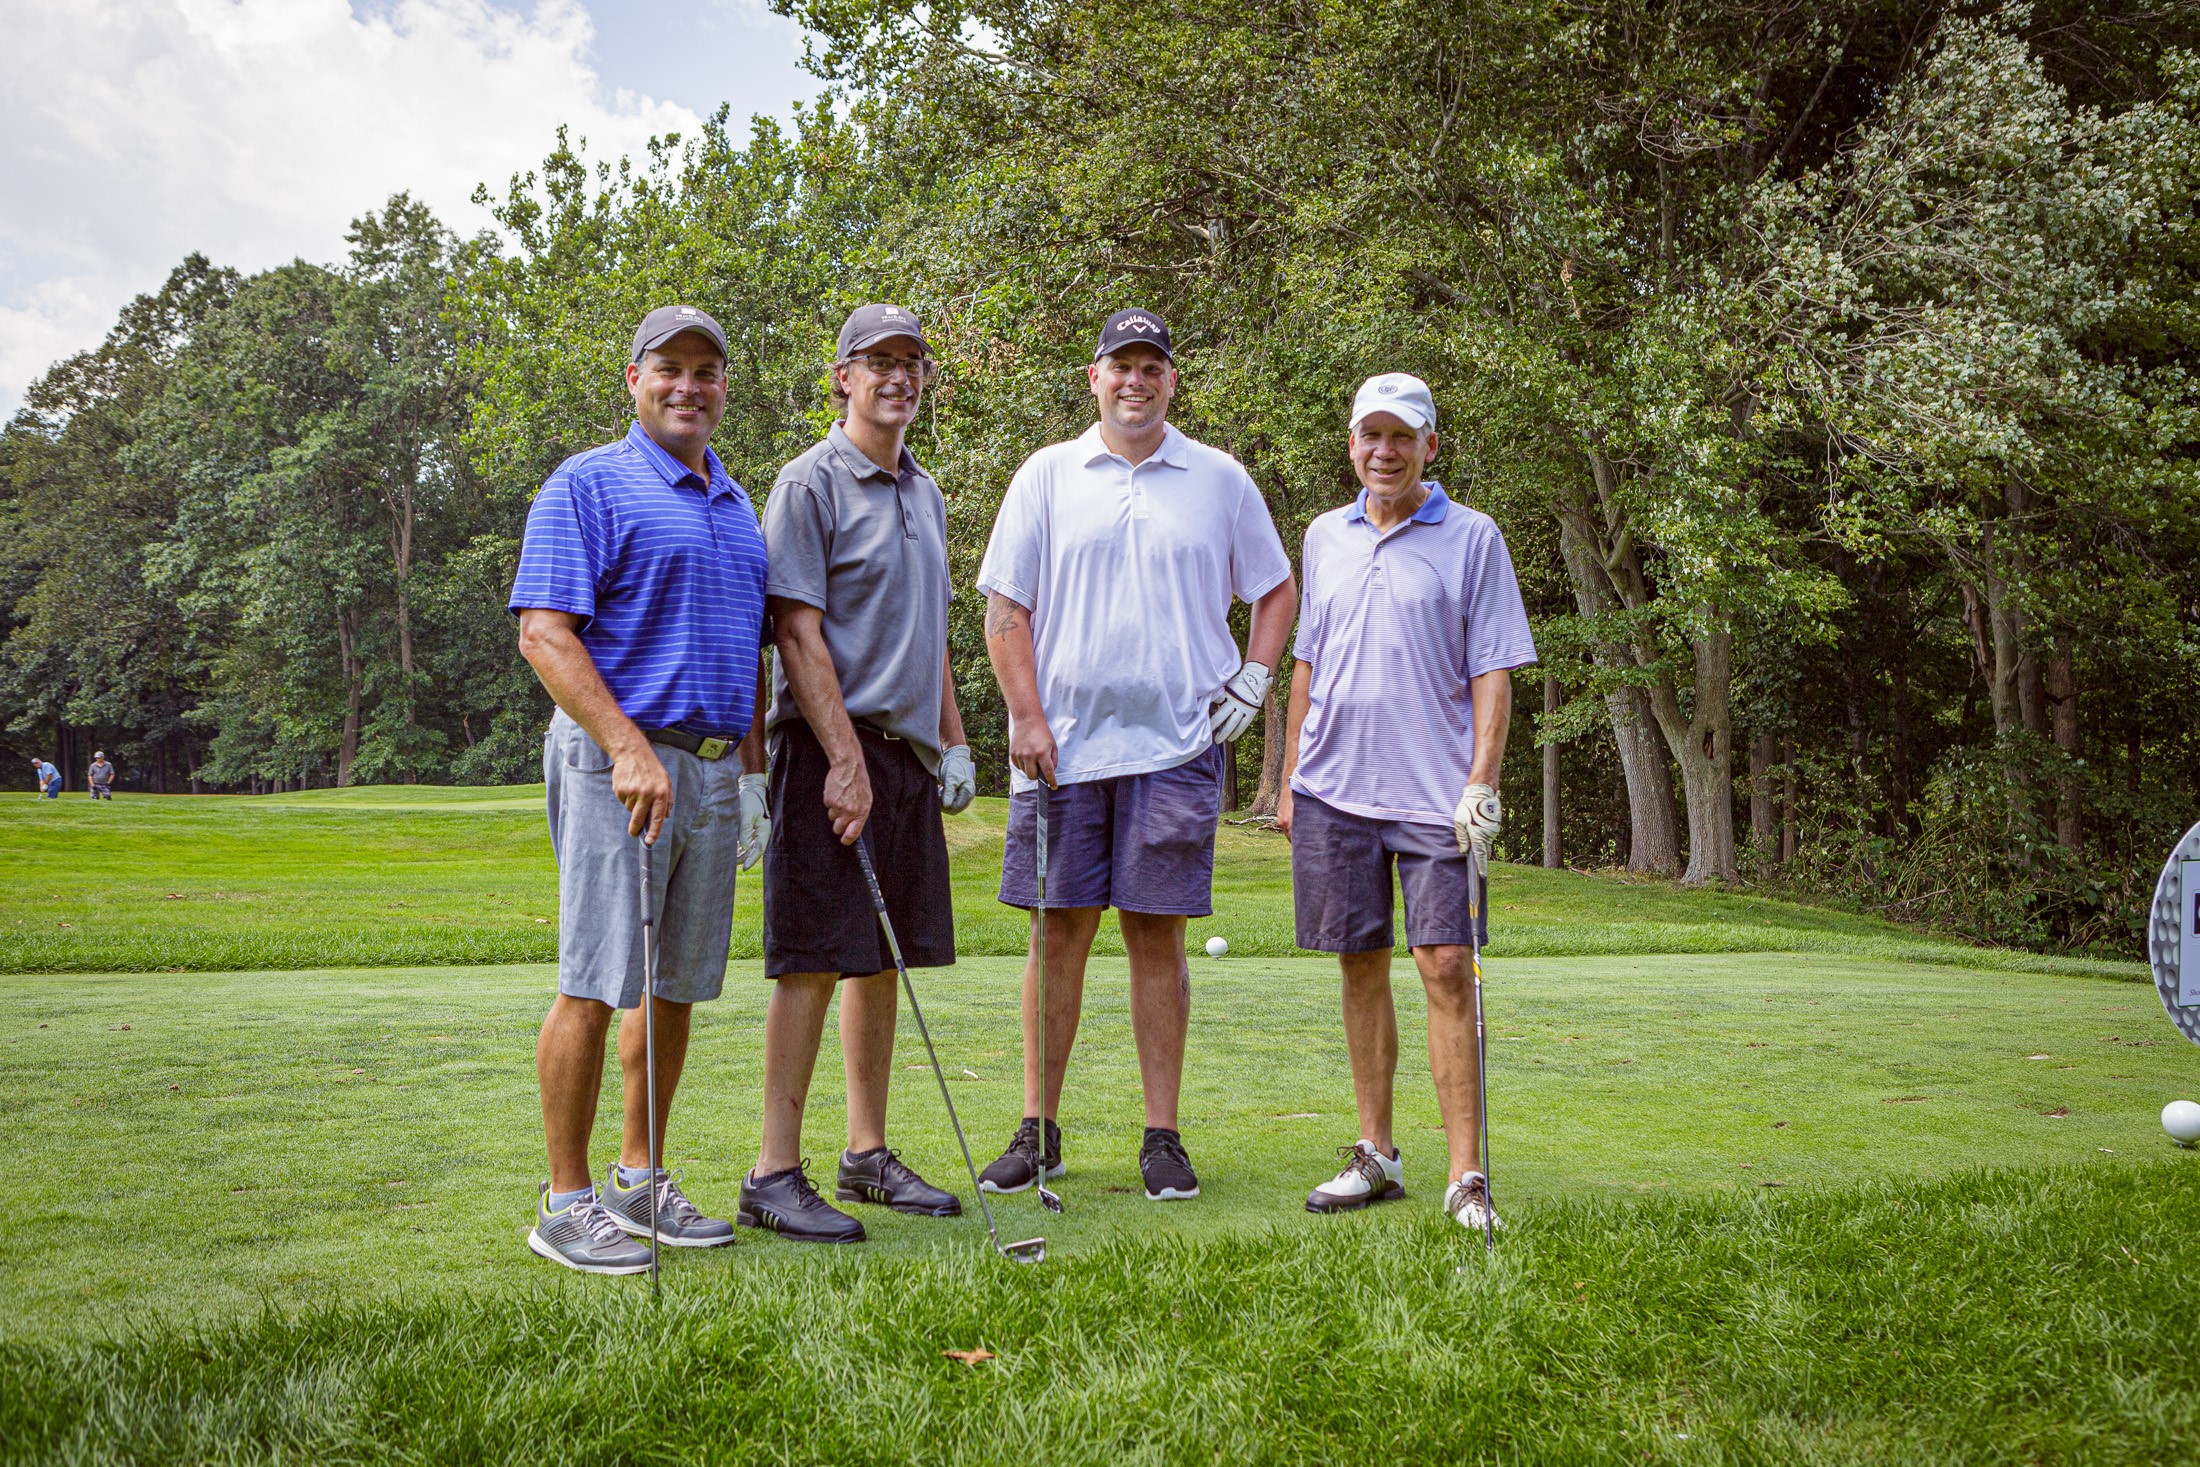 Schooley-Mitchell-Connecticut-cost-reduction-services-Chamber-of-Commerce-Involvement-Greater-Valley-Chambers-24th-Annual-Golf-Classic-2020